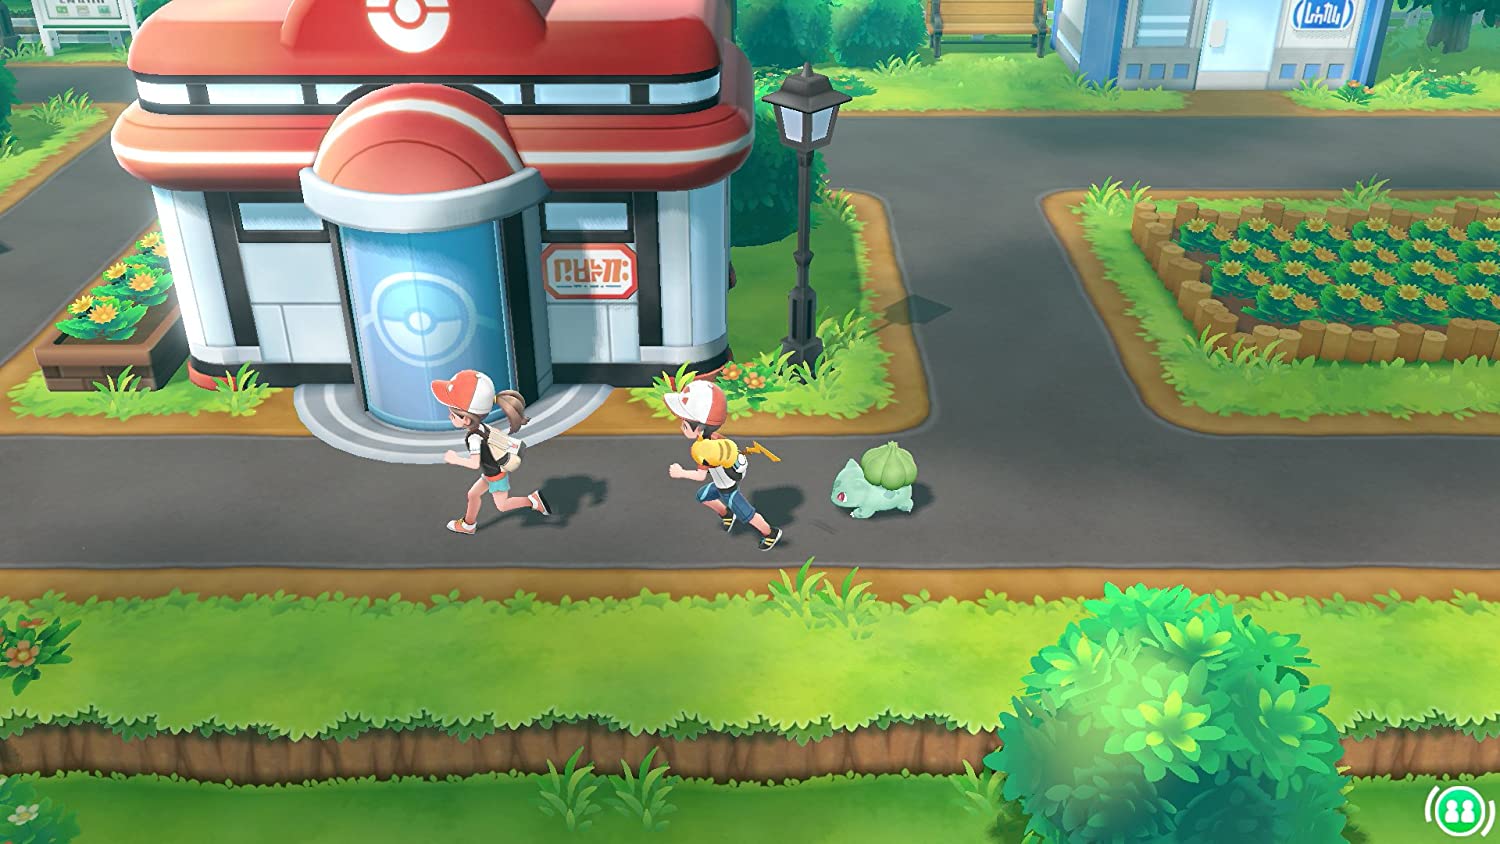 Pokemon games like the Let's Go remakes are an easy starting point